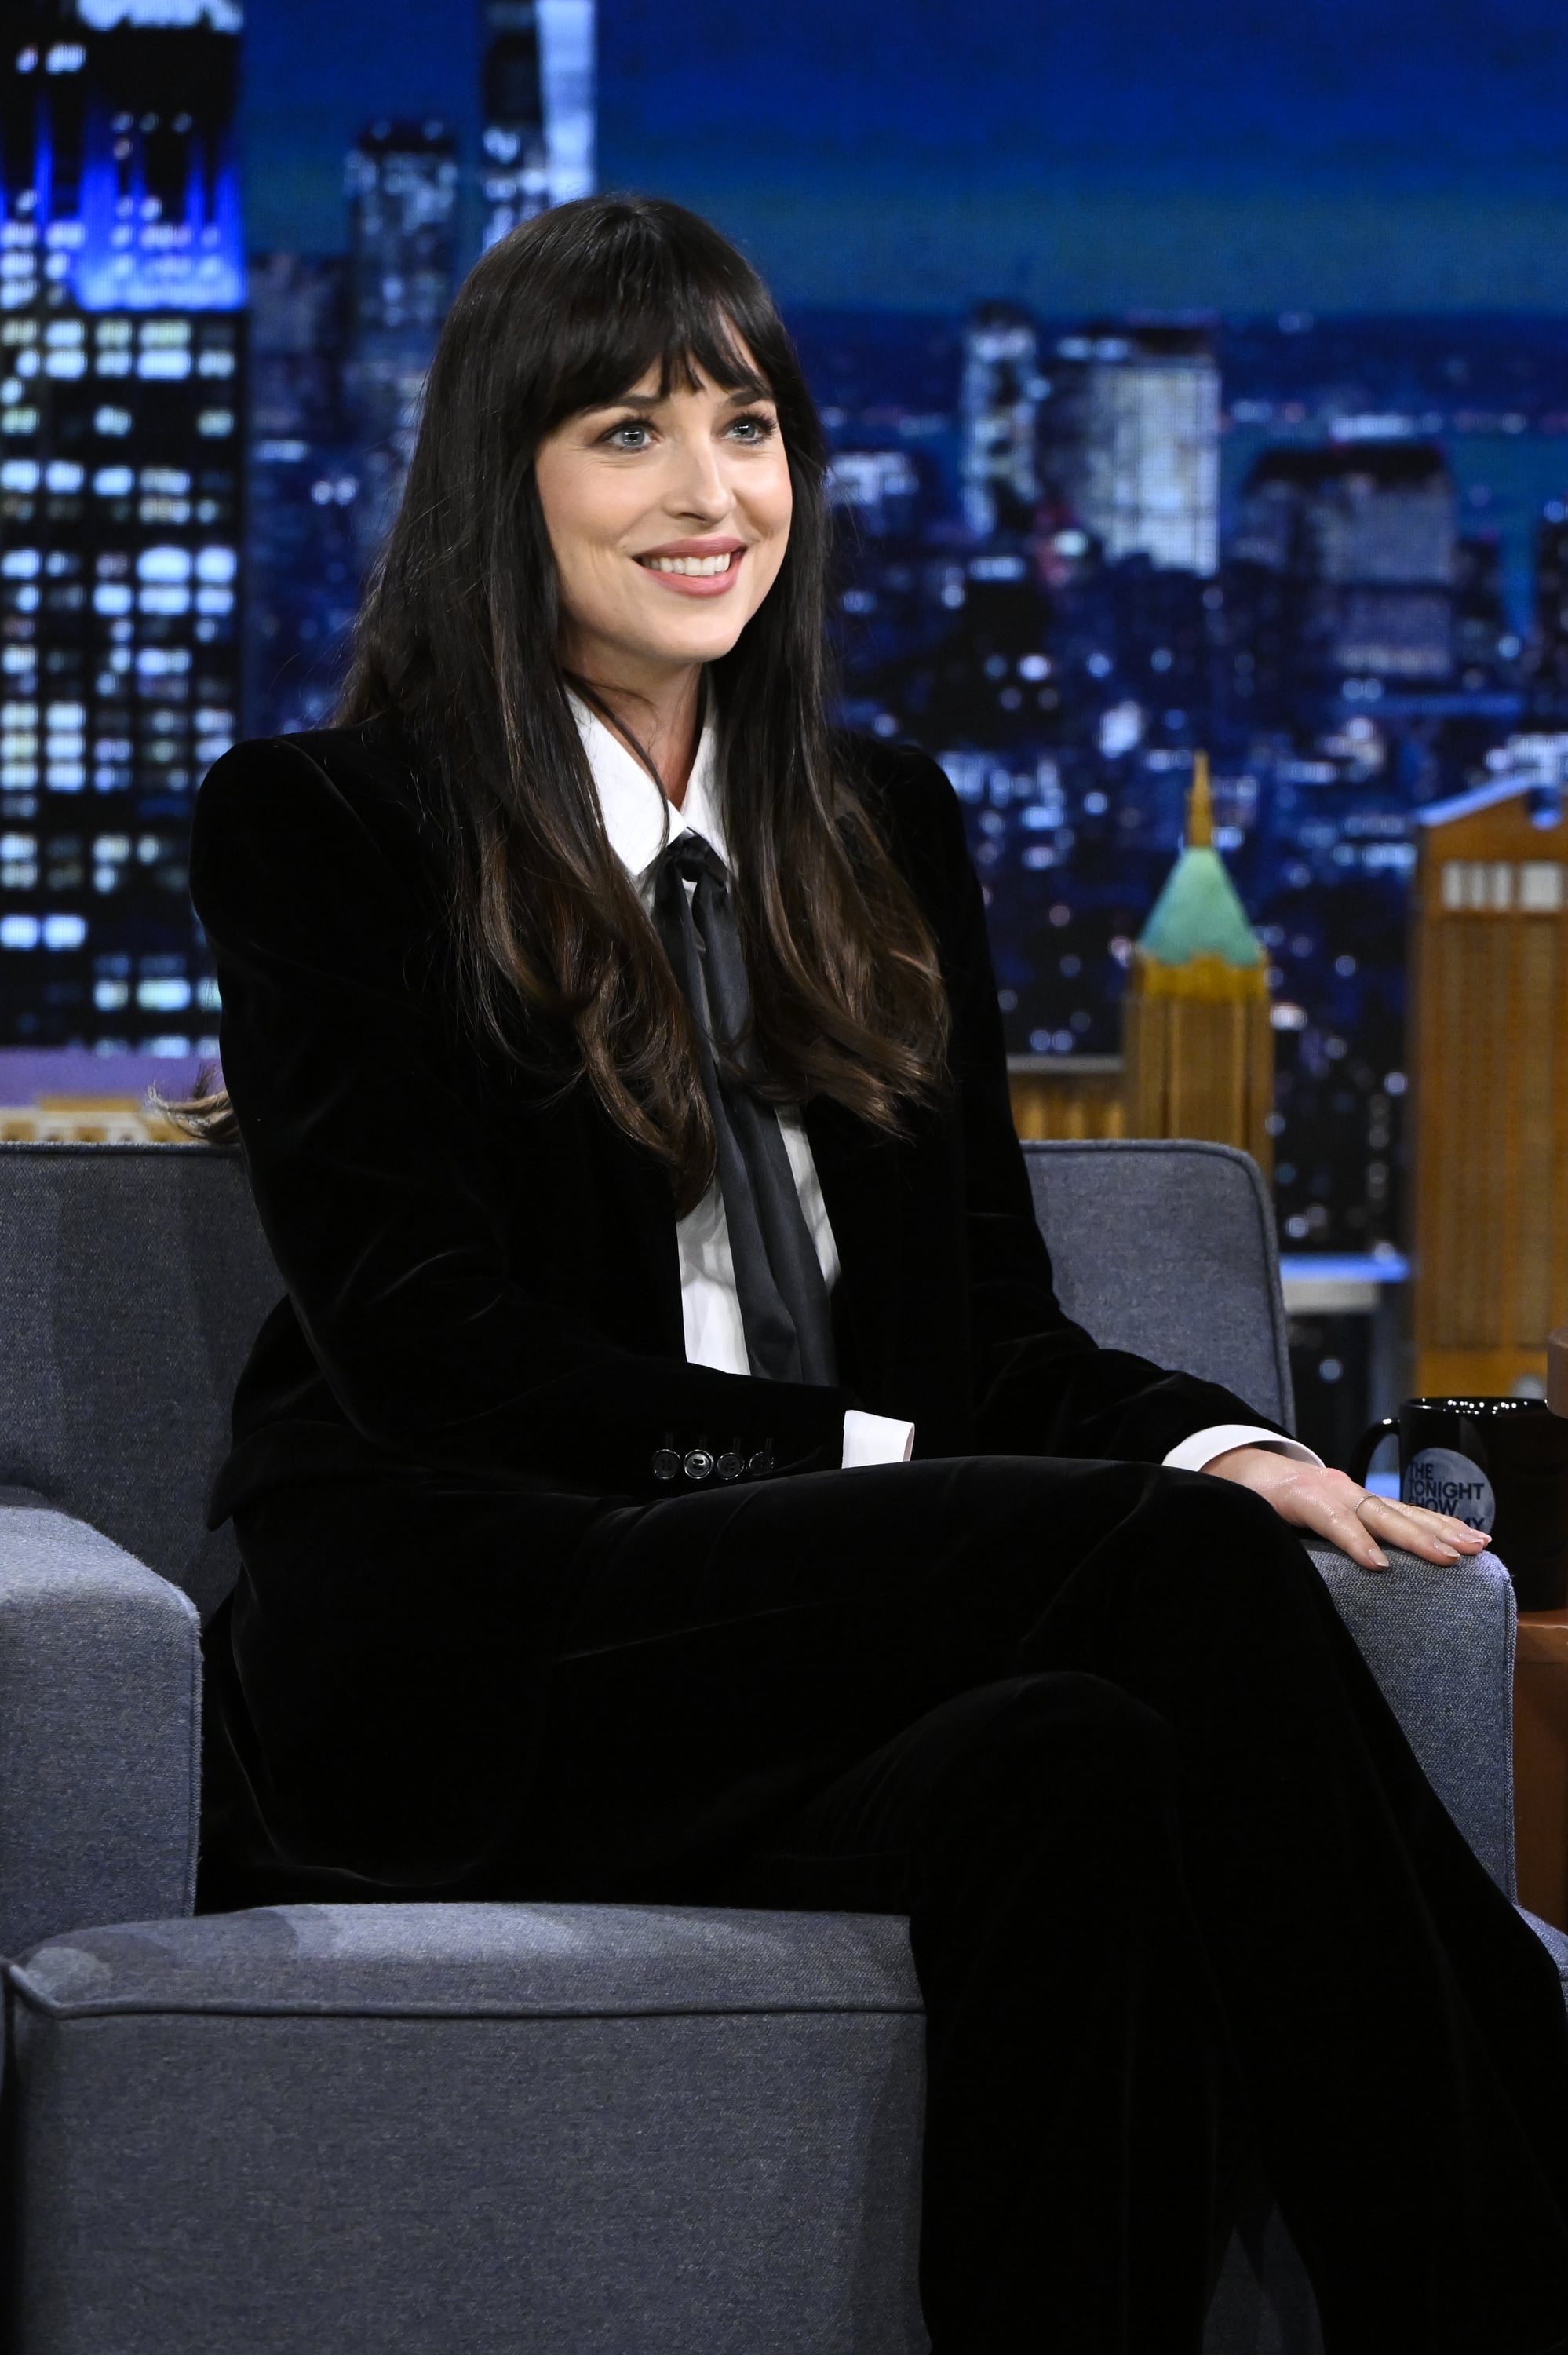 THE TONIGHT SHOW STARRING JIMMY FALLON -- Episode 1670 -- Pictured: Actress Dakota Johnson during an interview on Tuesday, June 14, 2022 -- (Photo by: Todd Owyoung/NBC/NBCU Photo Bank via Getty Images)